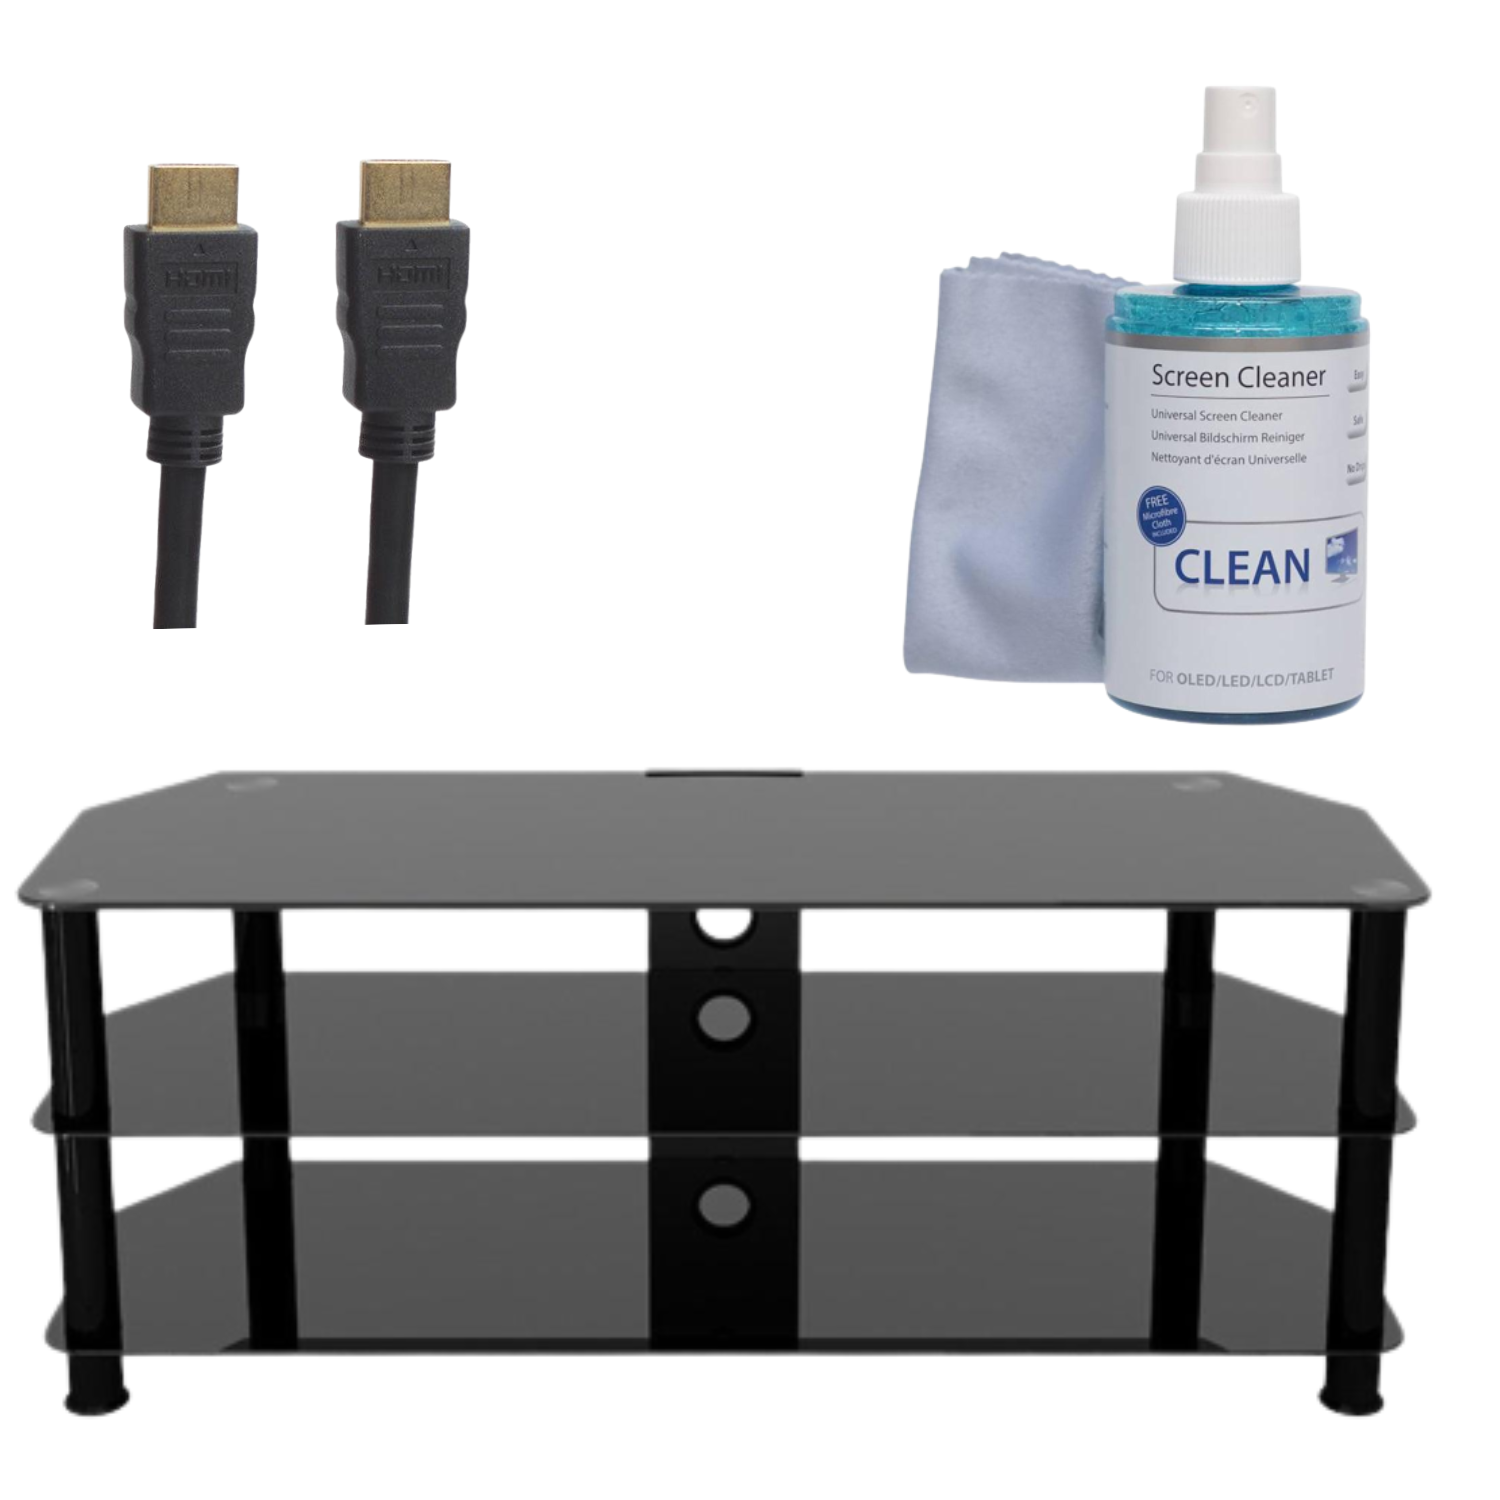 AVF Classic Corner Glass TV Stand for Up to 60" TV | 1m HDMI Cable | screen clean gel Bundle | TVSTANBUN2 from Avf - DID Electrical